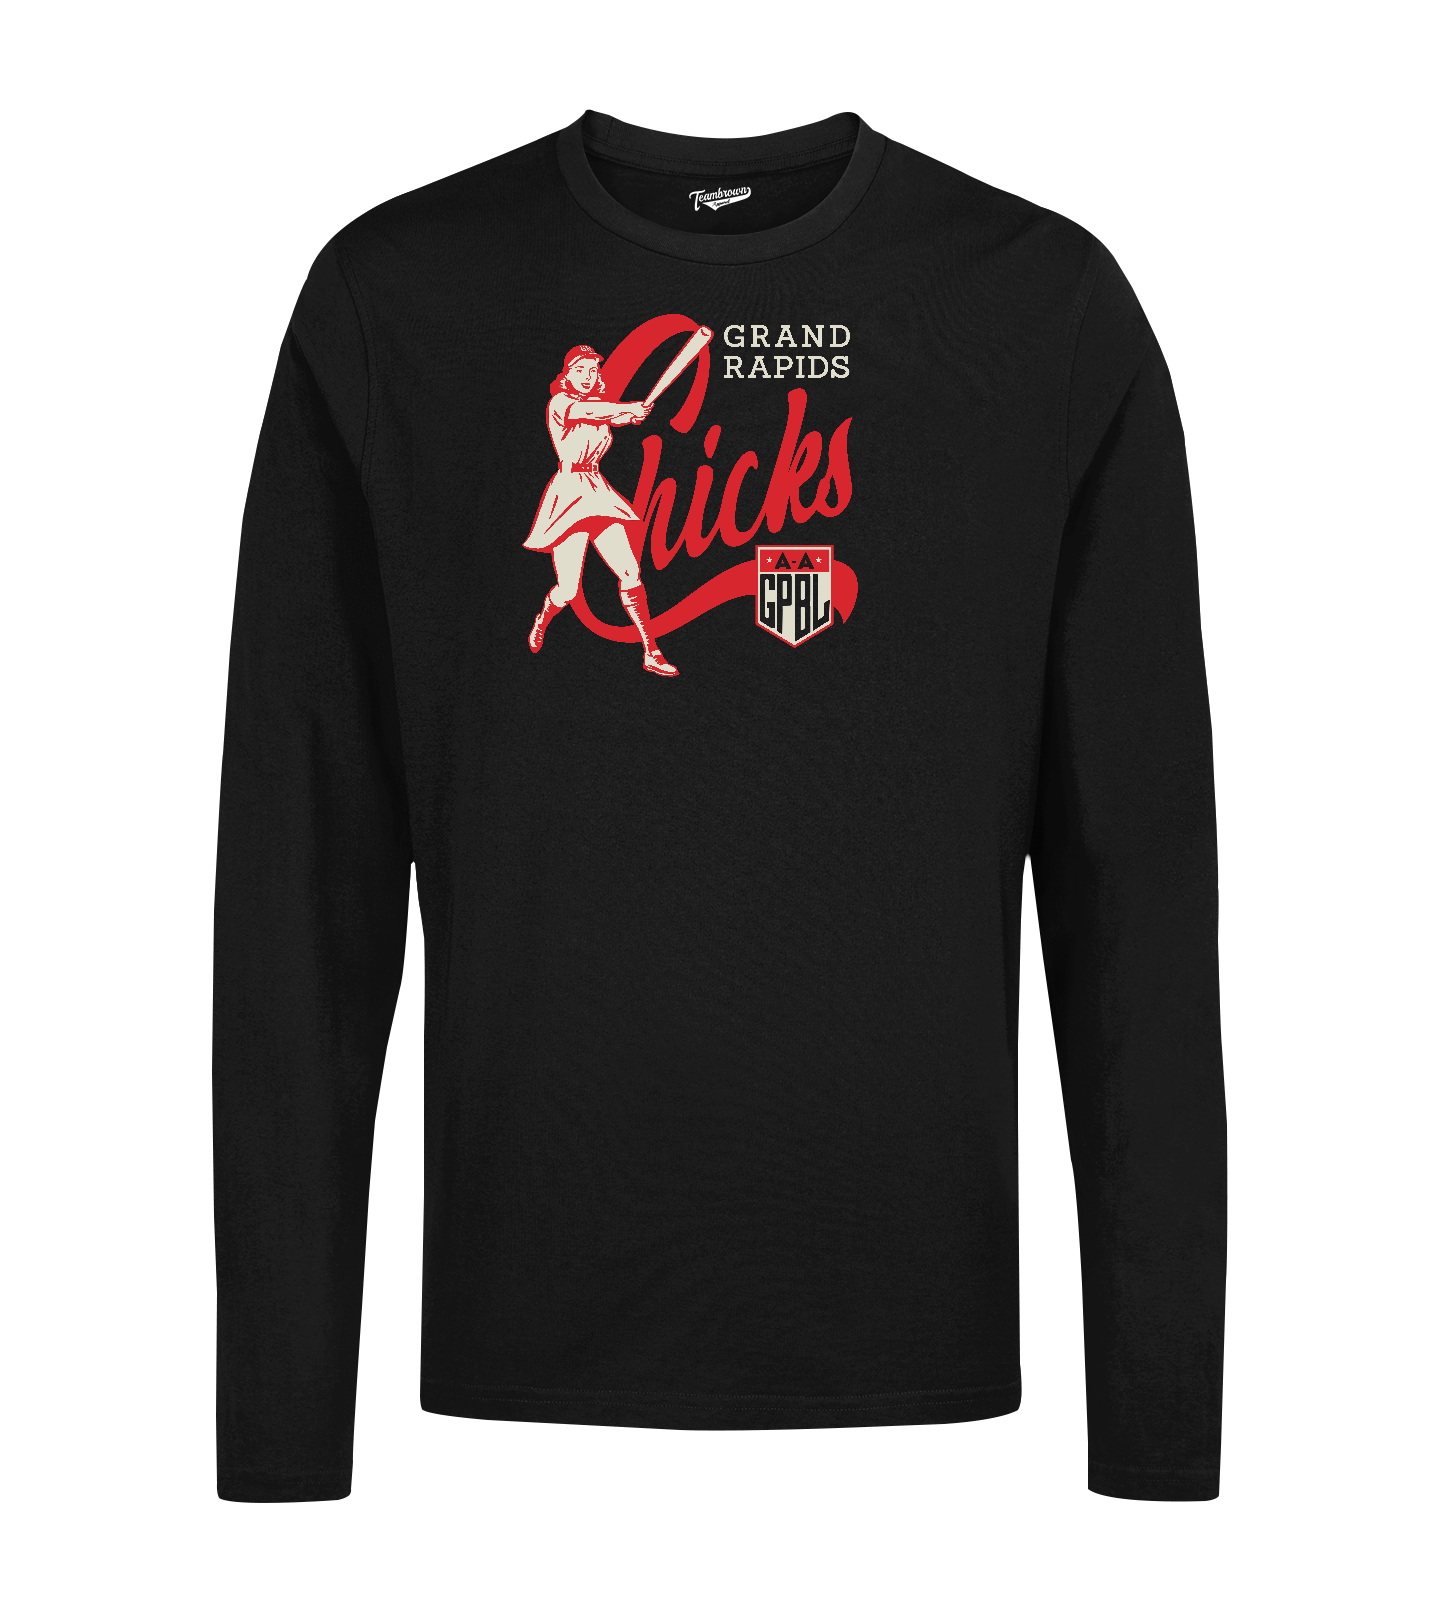 Diamond - Grand Rapids Chicks - Unisex Long Sleeve Crew T-Shirt | Officially Licensed - AAGPBL